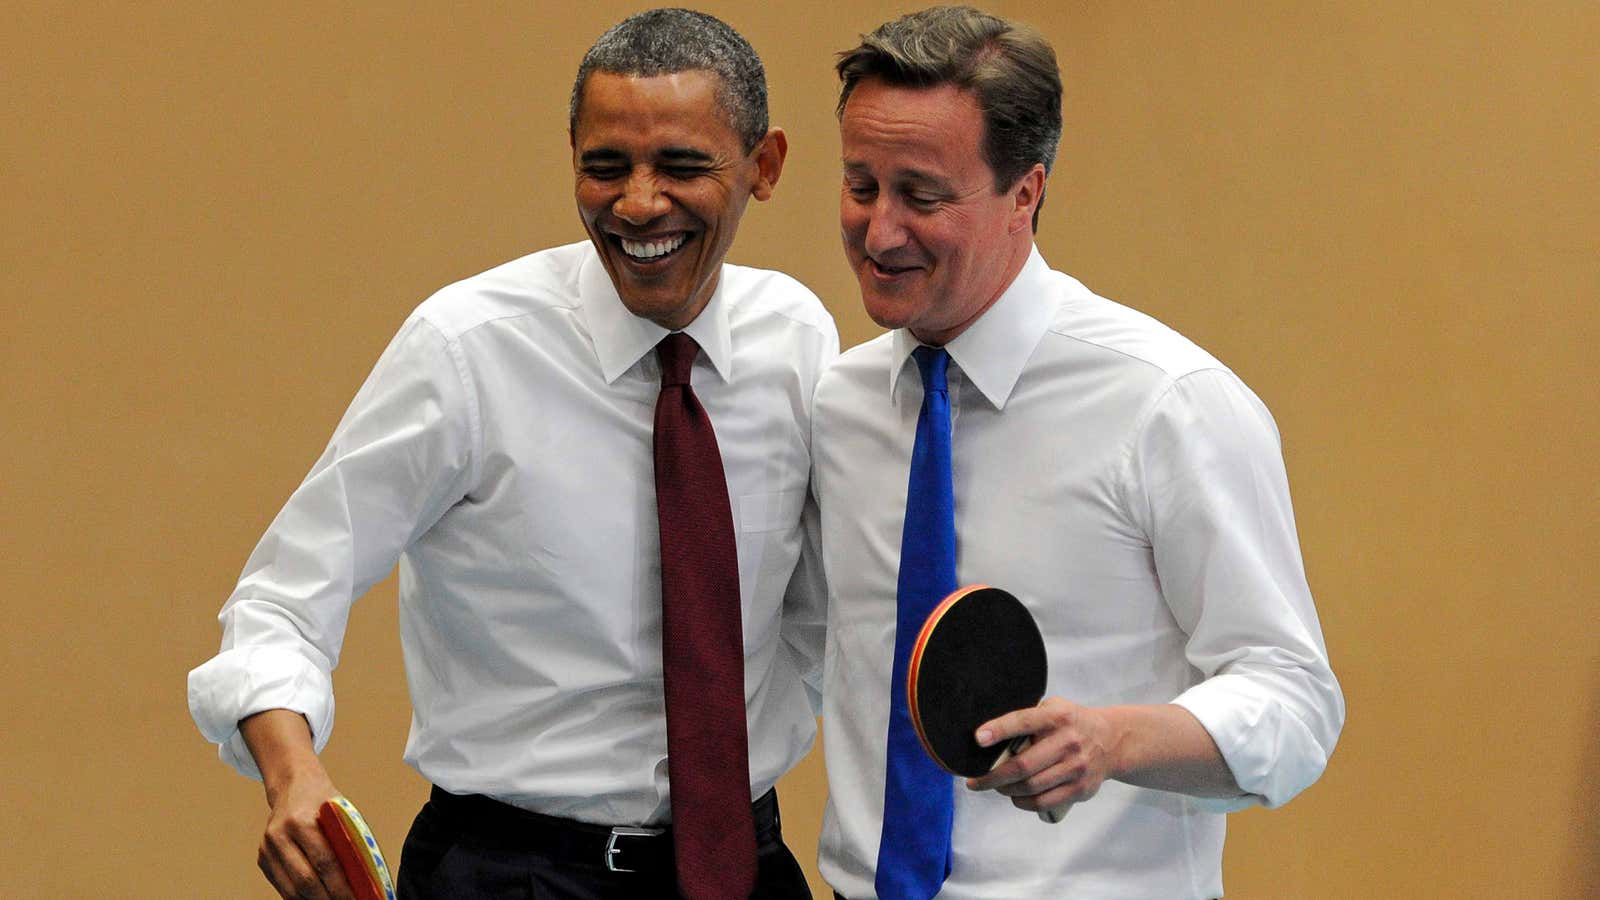 Cameron wants a friend with him at the negotiating (and ping pong) table.